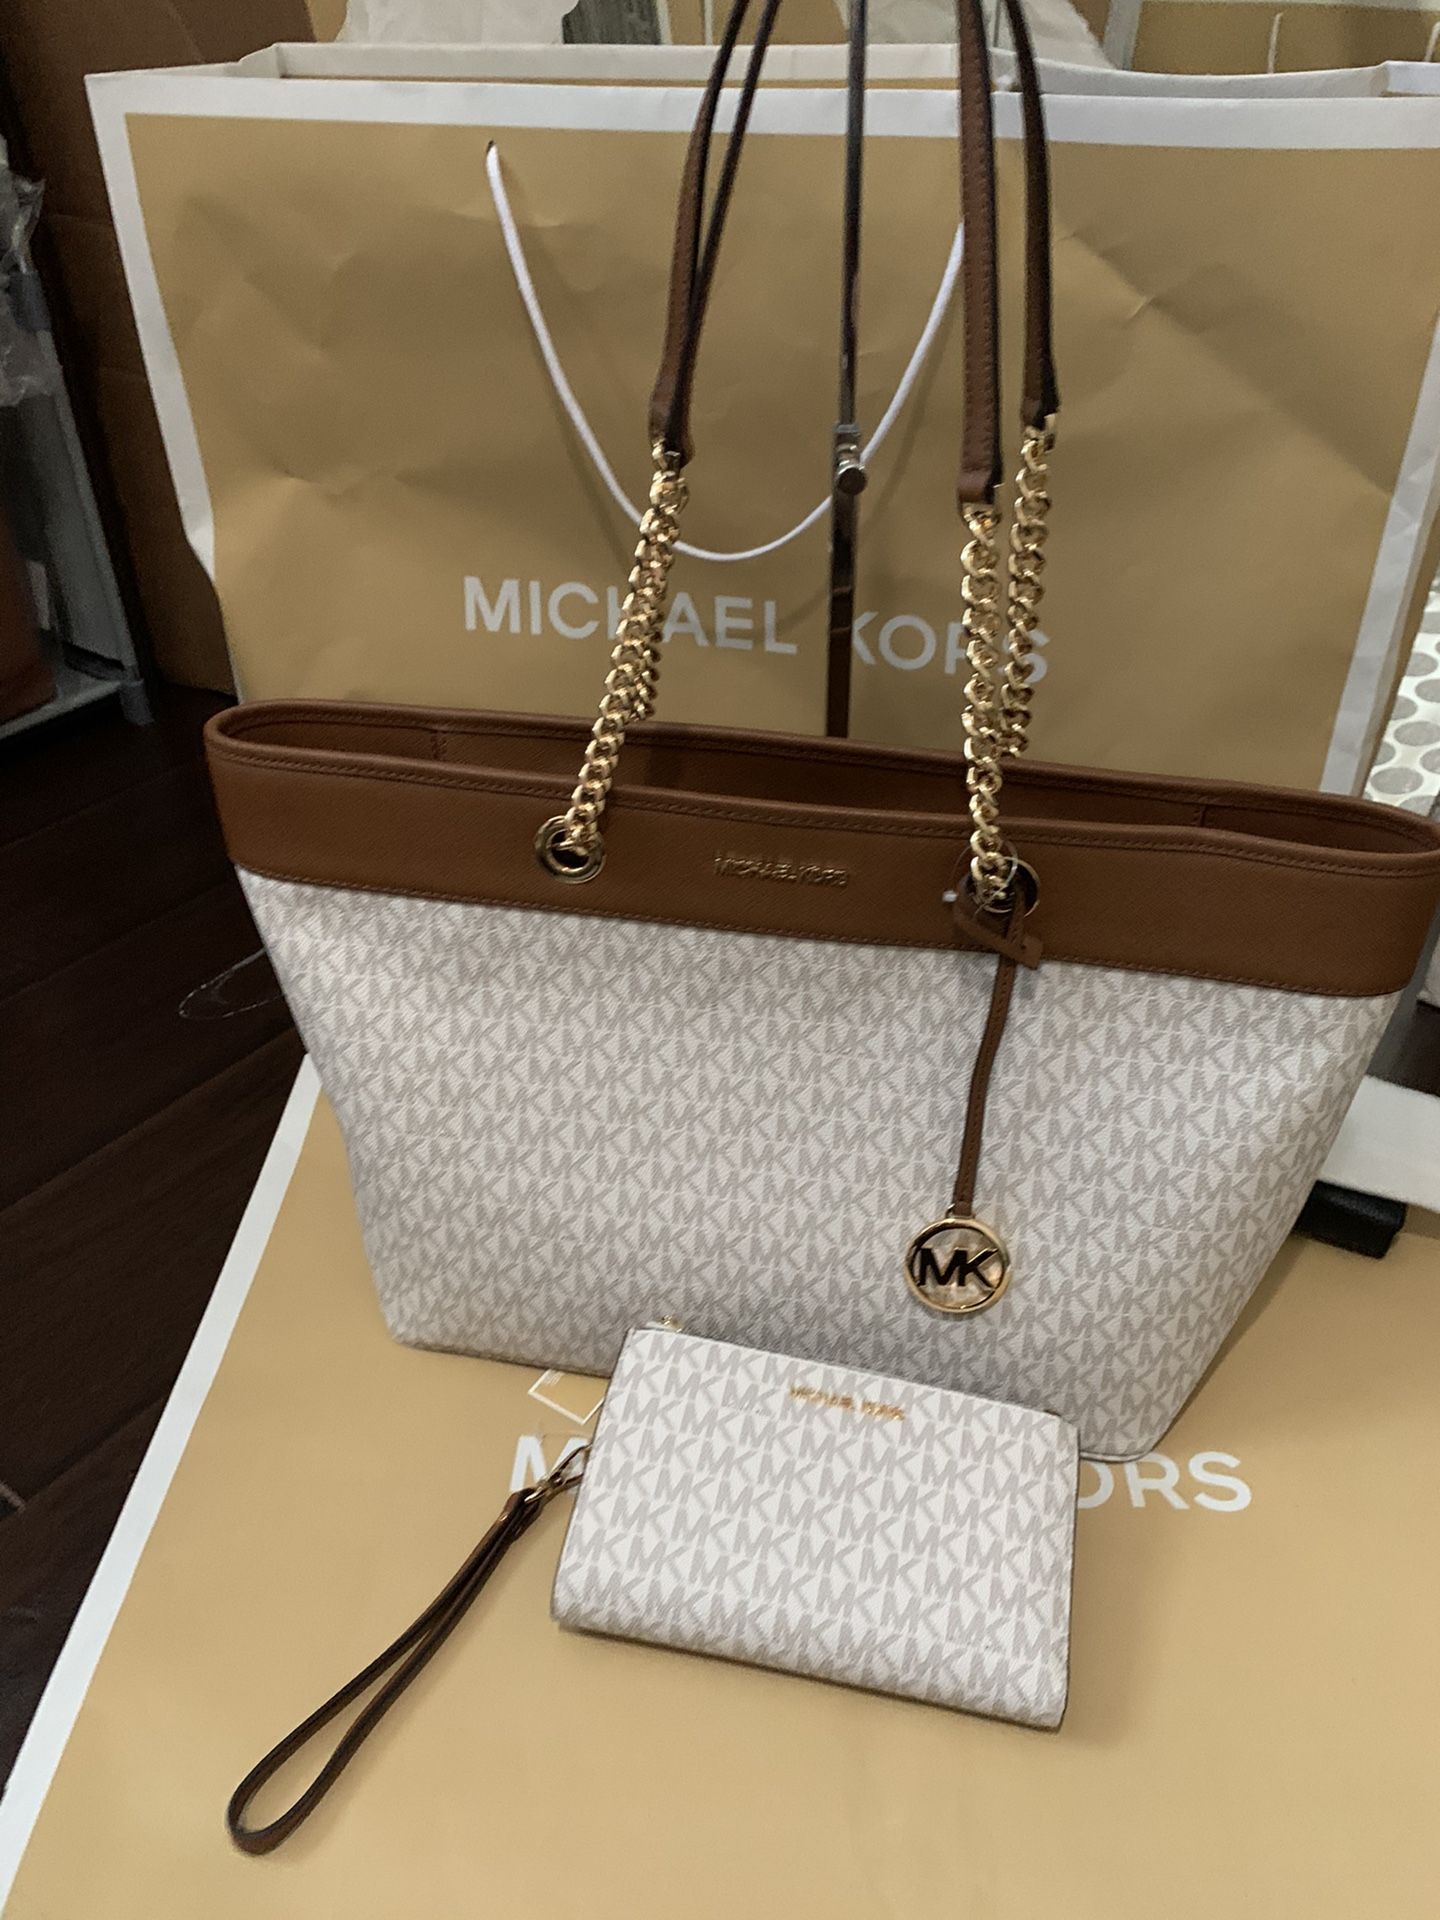 Brand new!!! 💯Real !!! Michael kors chain tote purse with matching wallet